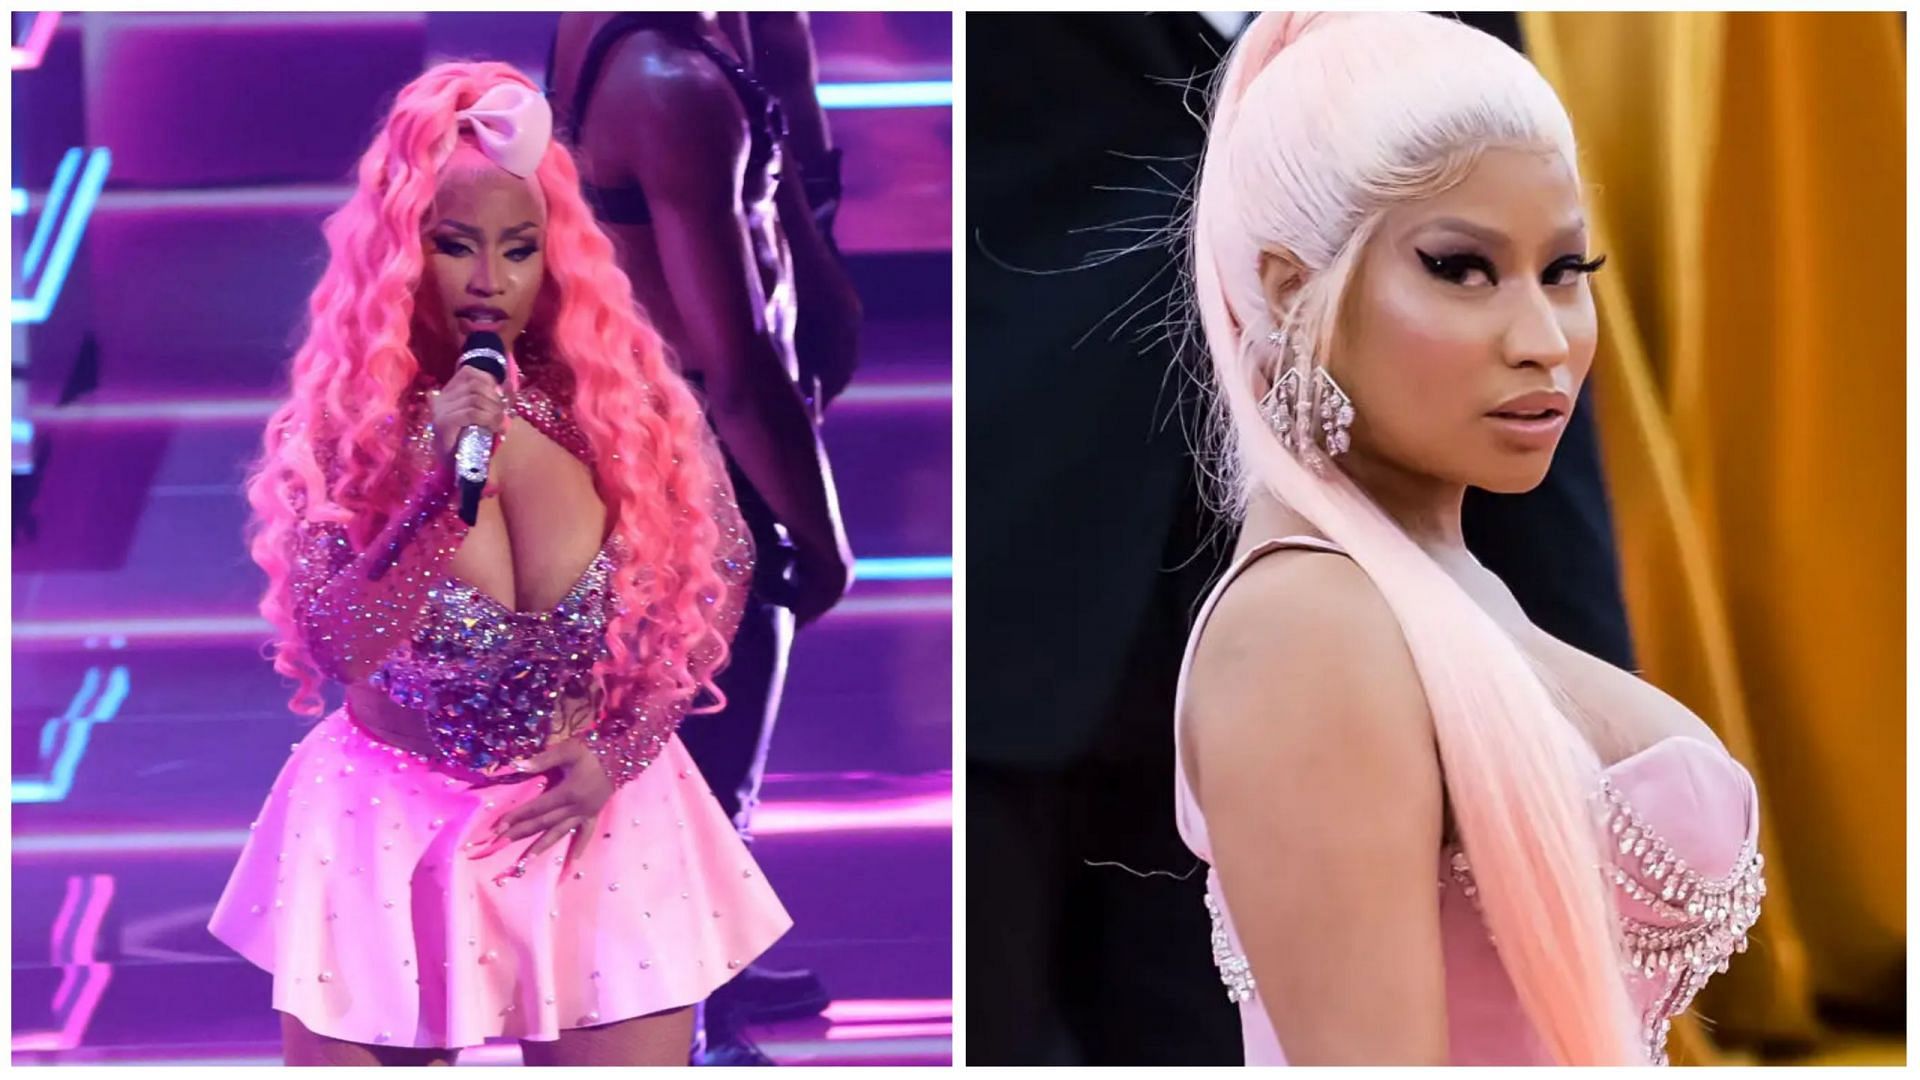 Meaning explored as audio from Nicki Minaj song goes viral.